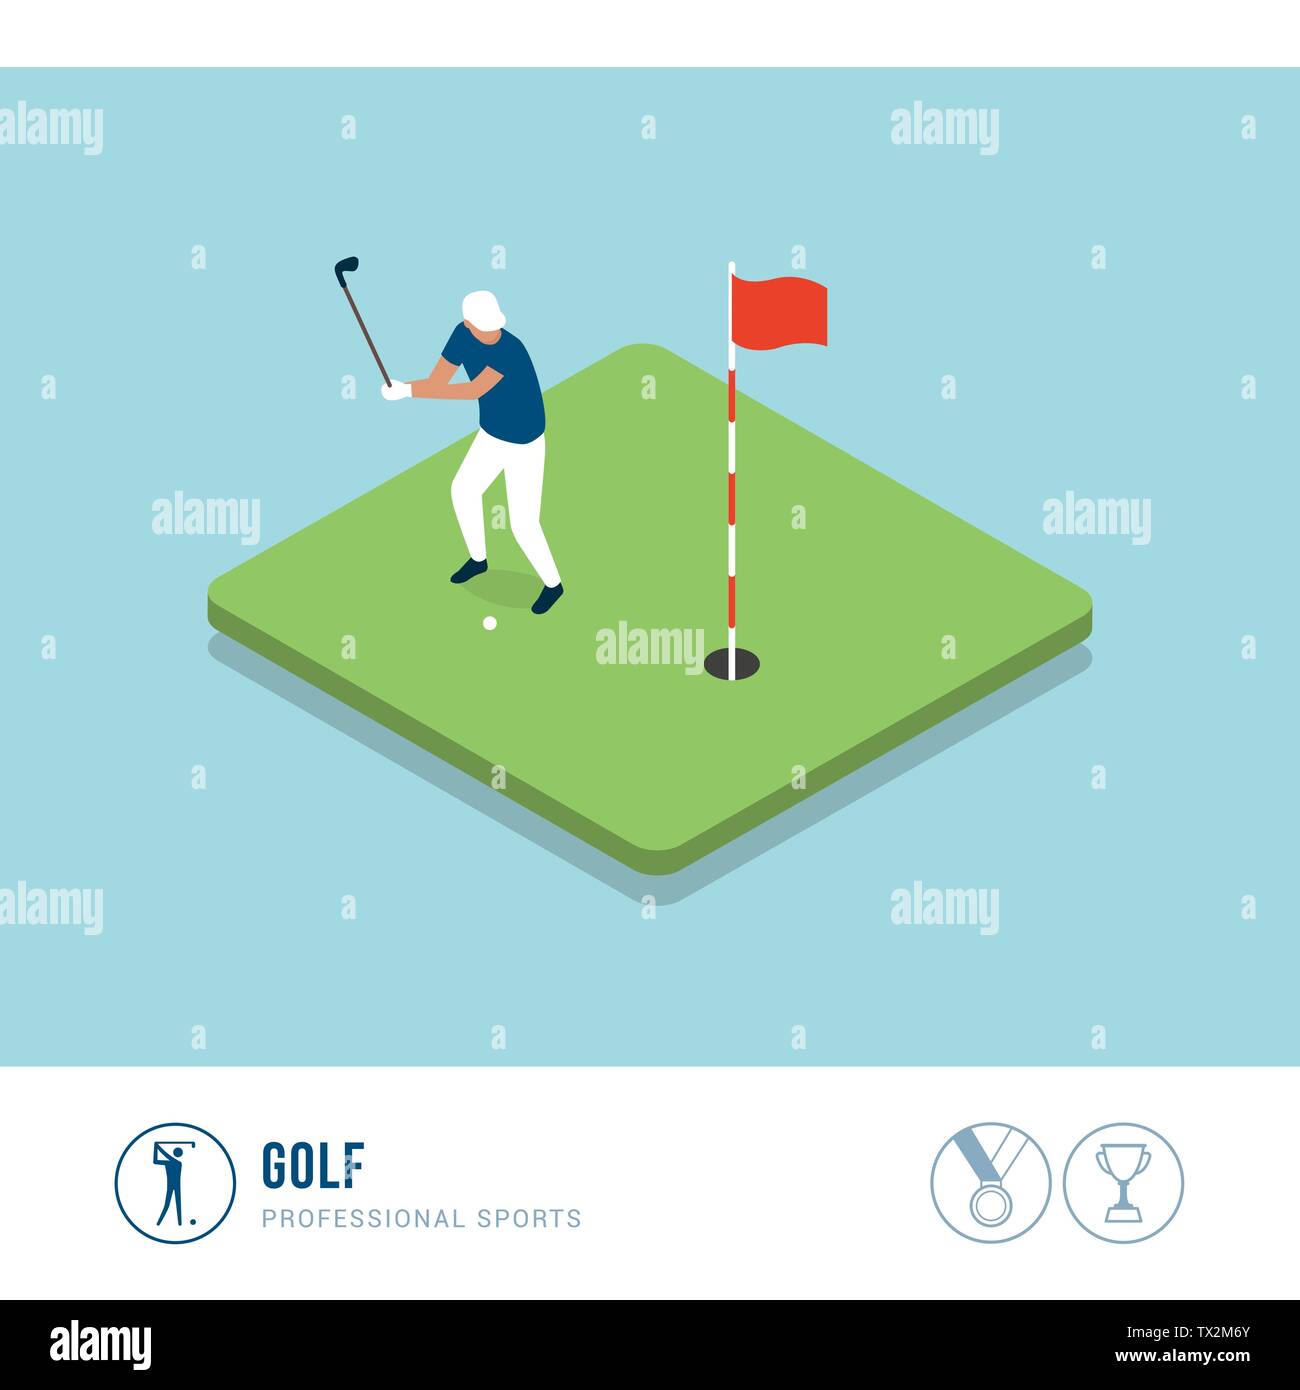 Professional sports competition: golf, player hitting a ball with a club Stock Vector